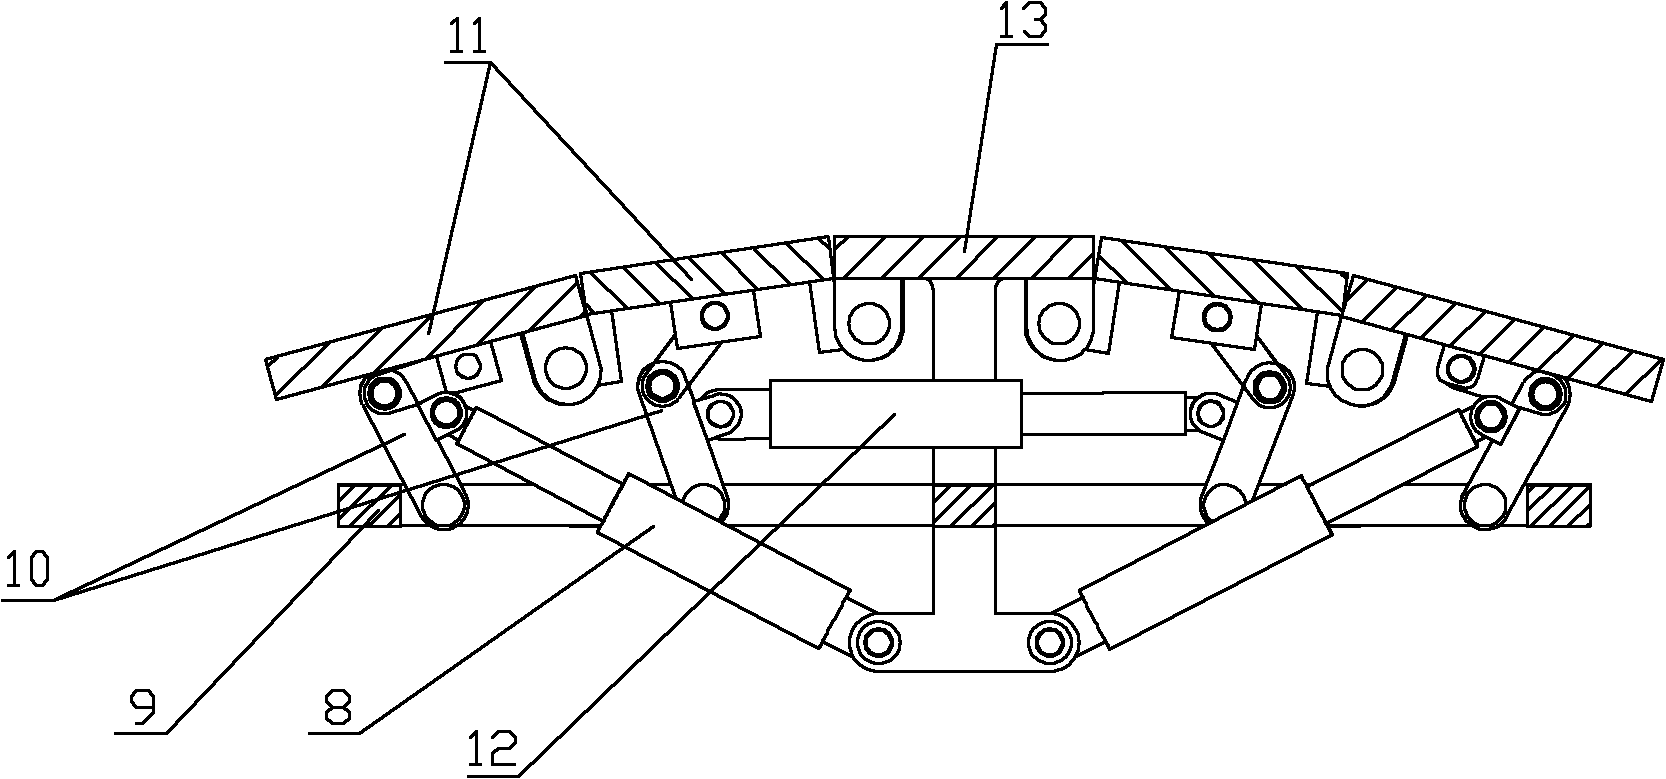 Temporary supporting device for roadway drifting